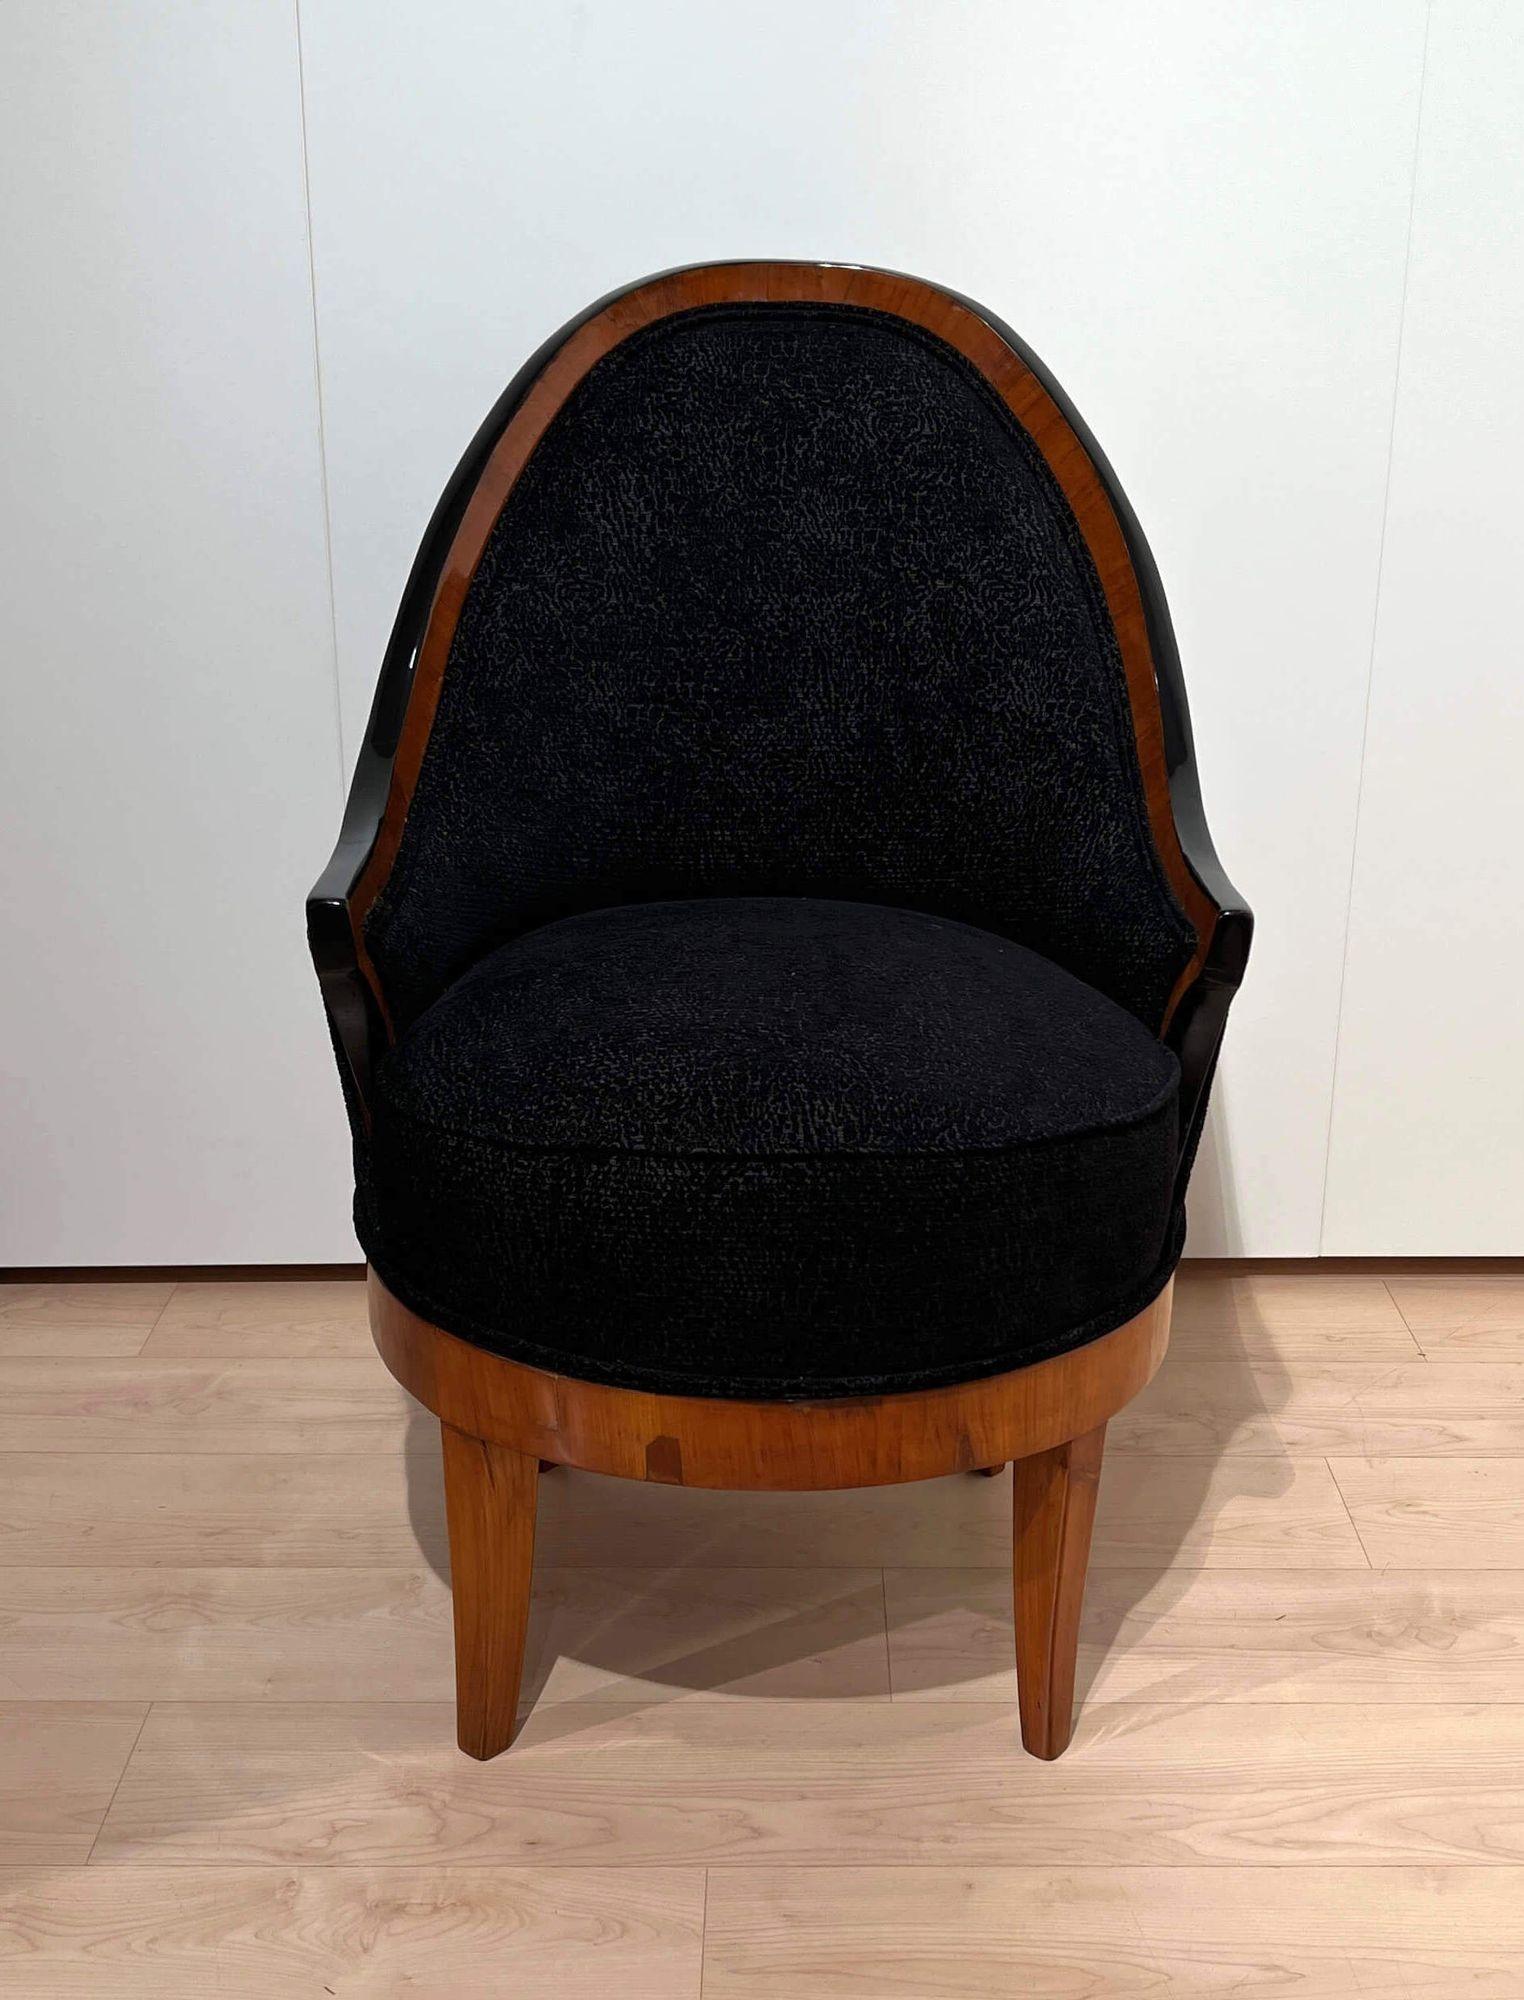 Rare original Biedermeier swivel or revolving chair or bergere chair, armchair or club chair from South Germany about 1820.
 
Cherry veneered and solid. Newly upholstered with black mottled velvet fabric and double keder.
Base on 4 legs with